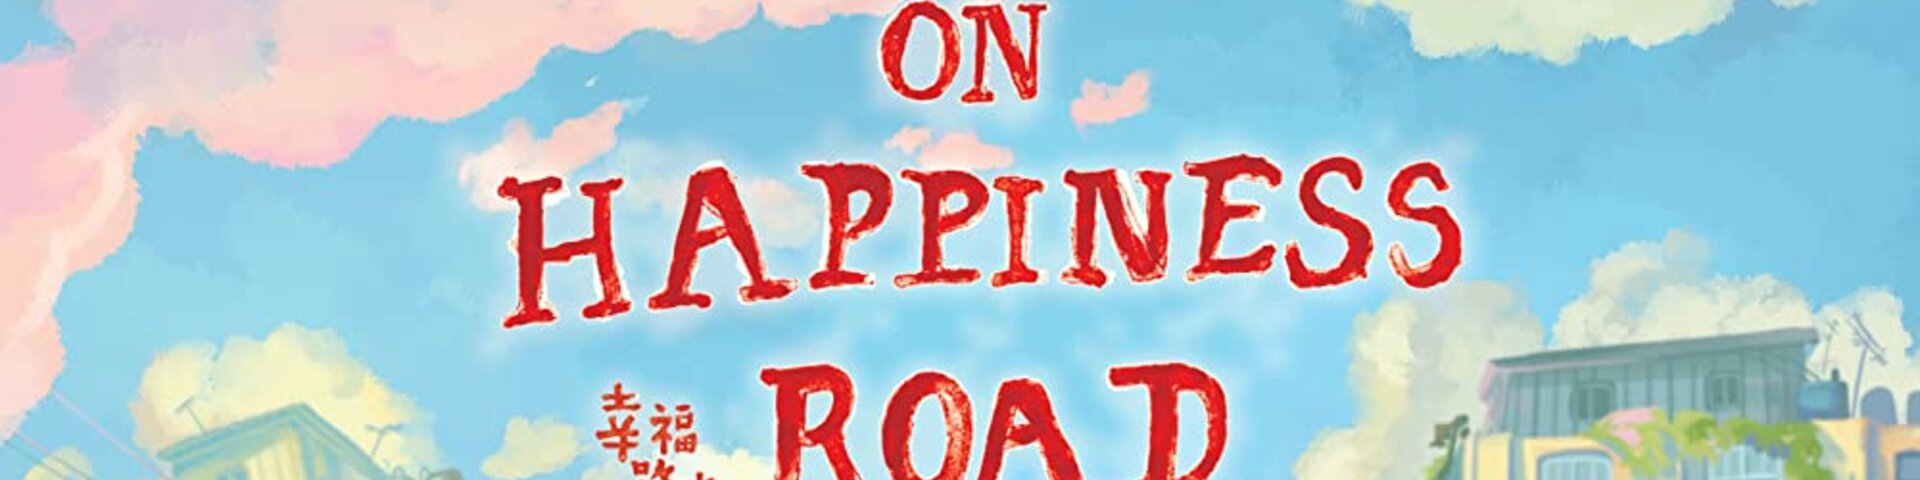 Movie 'On happiness road